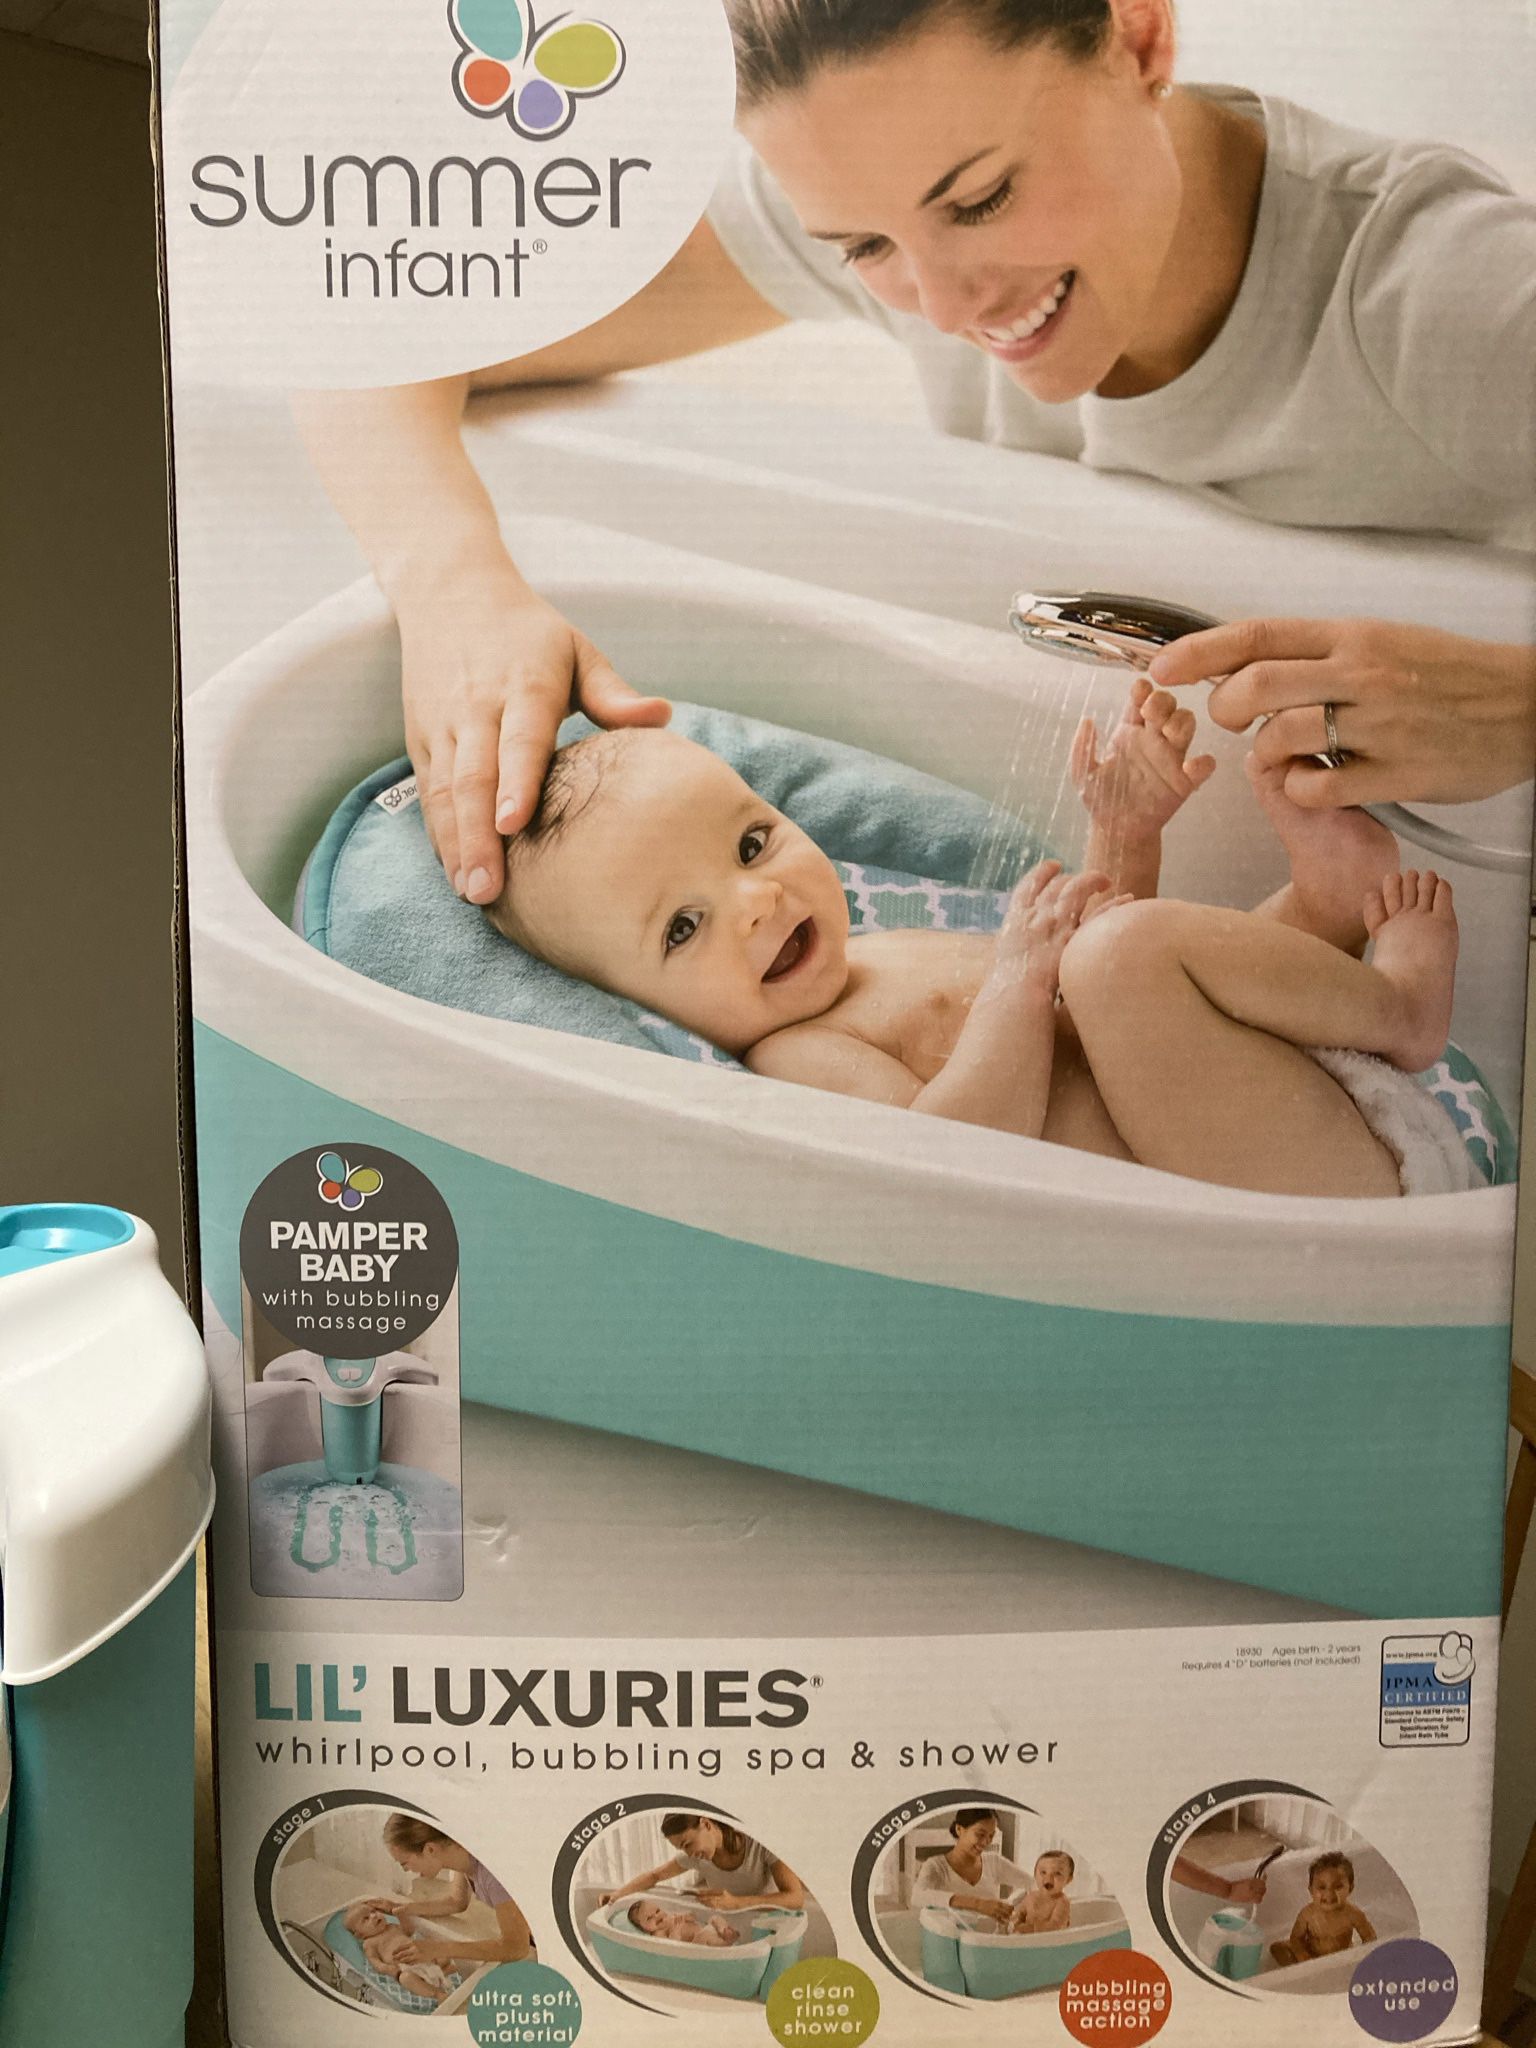 Whirlpool, Bubbling Spa & Shower (Pumber Baby )